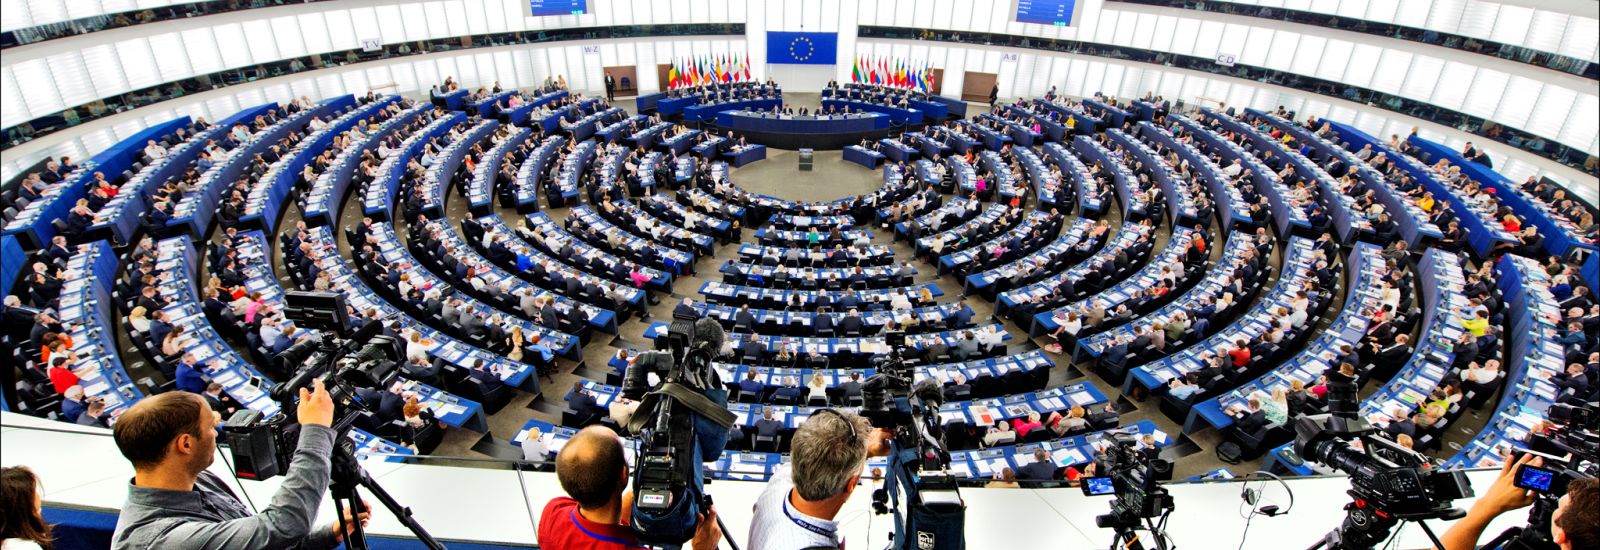 A panoramic view of the interior of the European Parliament, full of parliamentarians ahead of a vote. In the foreground a group of cameramen and photographers position their cameras onto the room. 